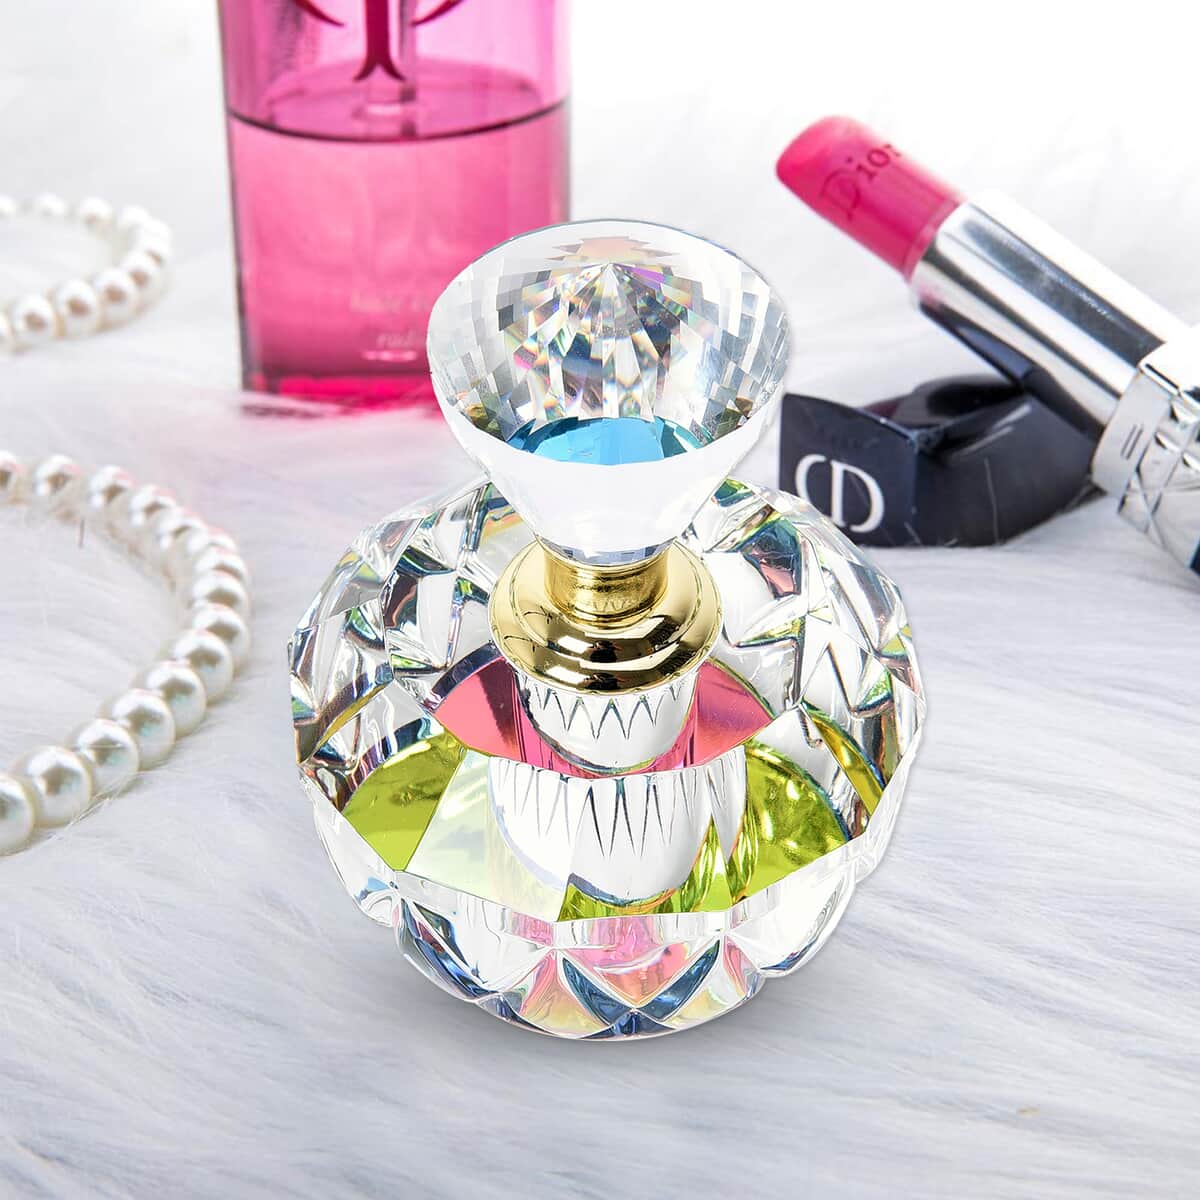 Decorative & Functional Re-fillable Perfume Bottle (5 ml) image number 1